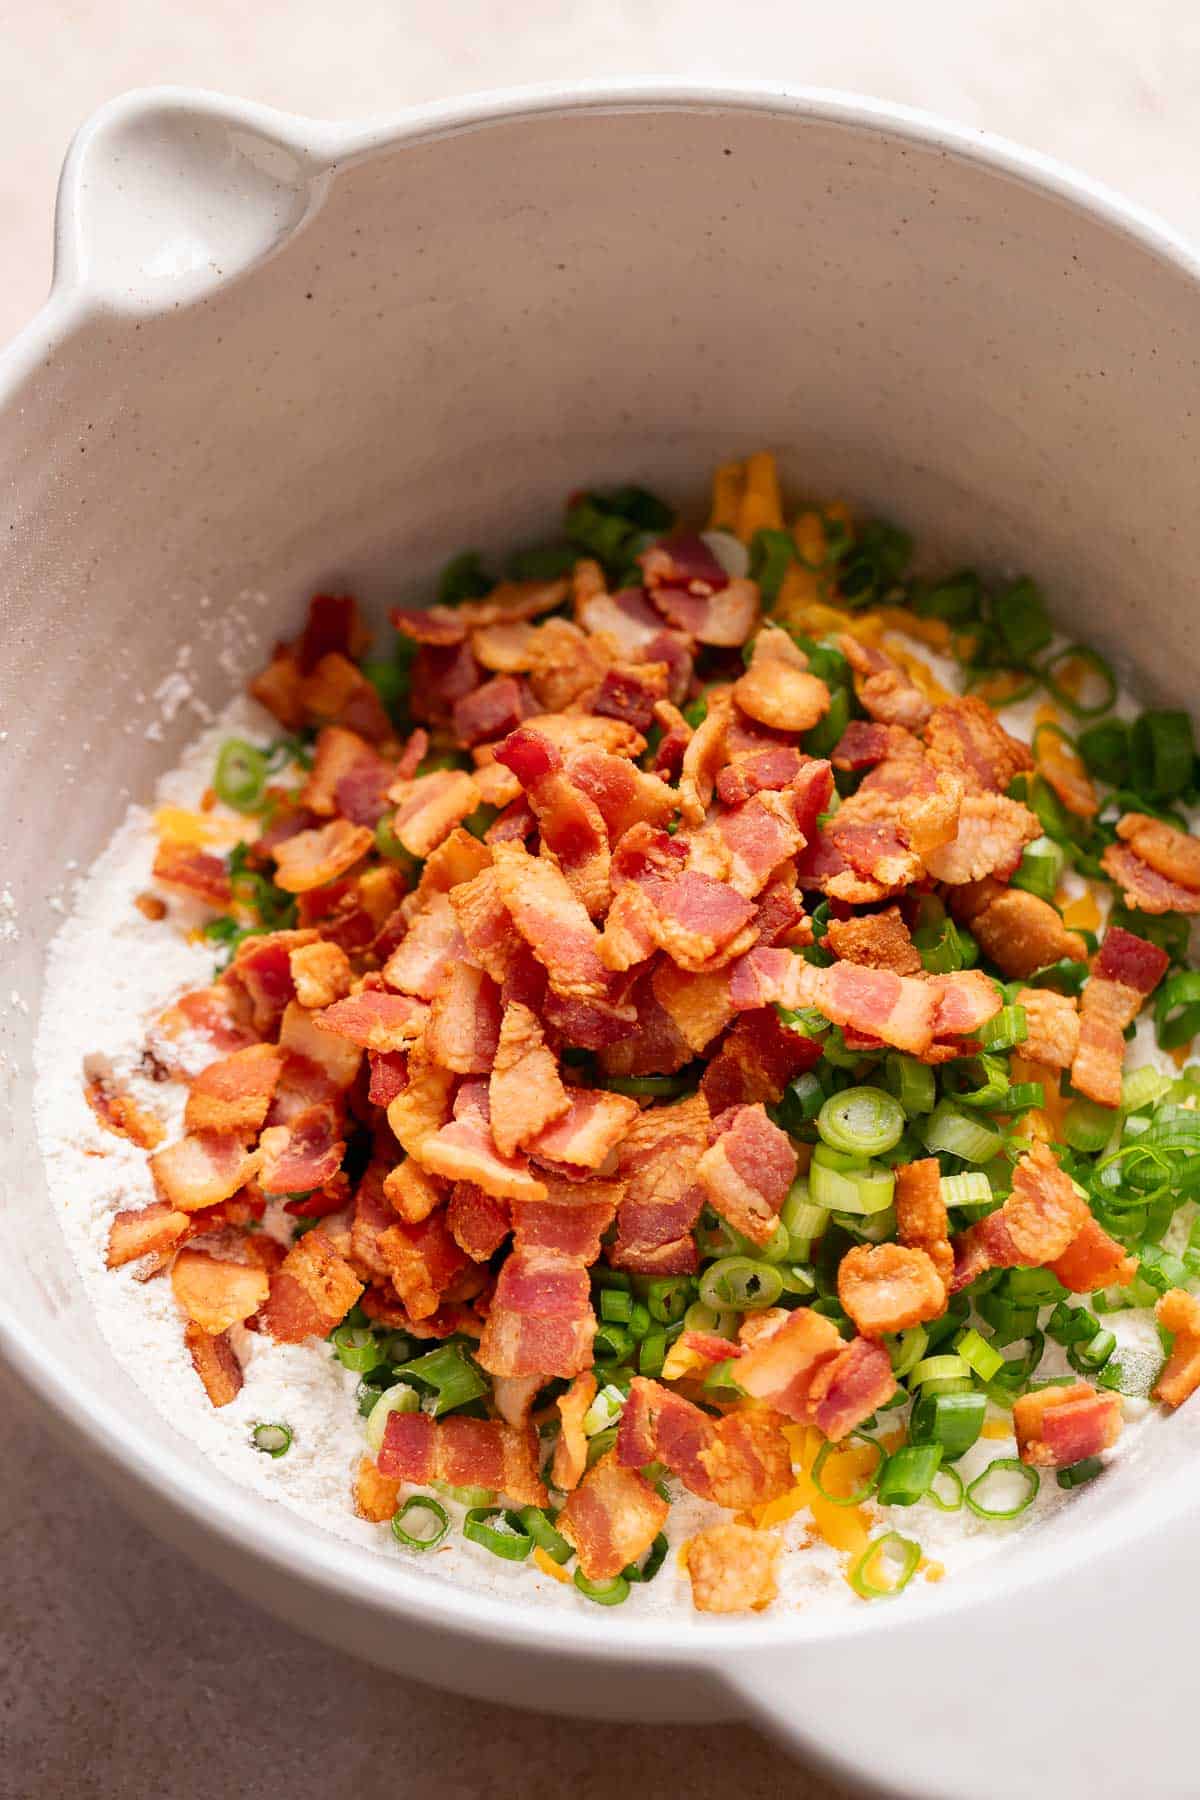 A mixing bowl with the dry ingredients, bacon, cheese, and scallions before mixing.